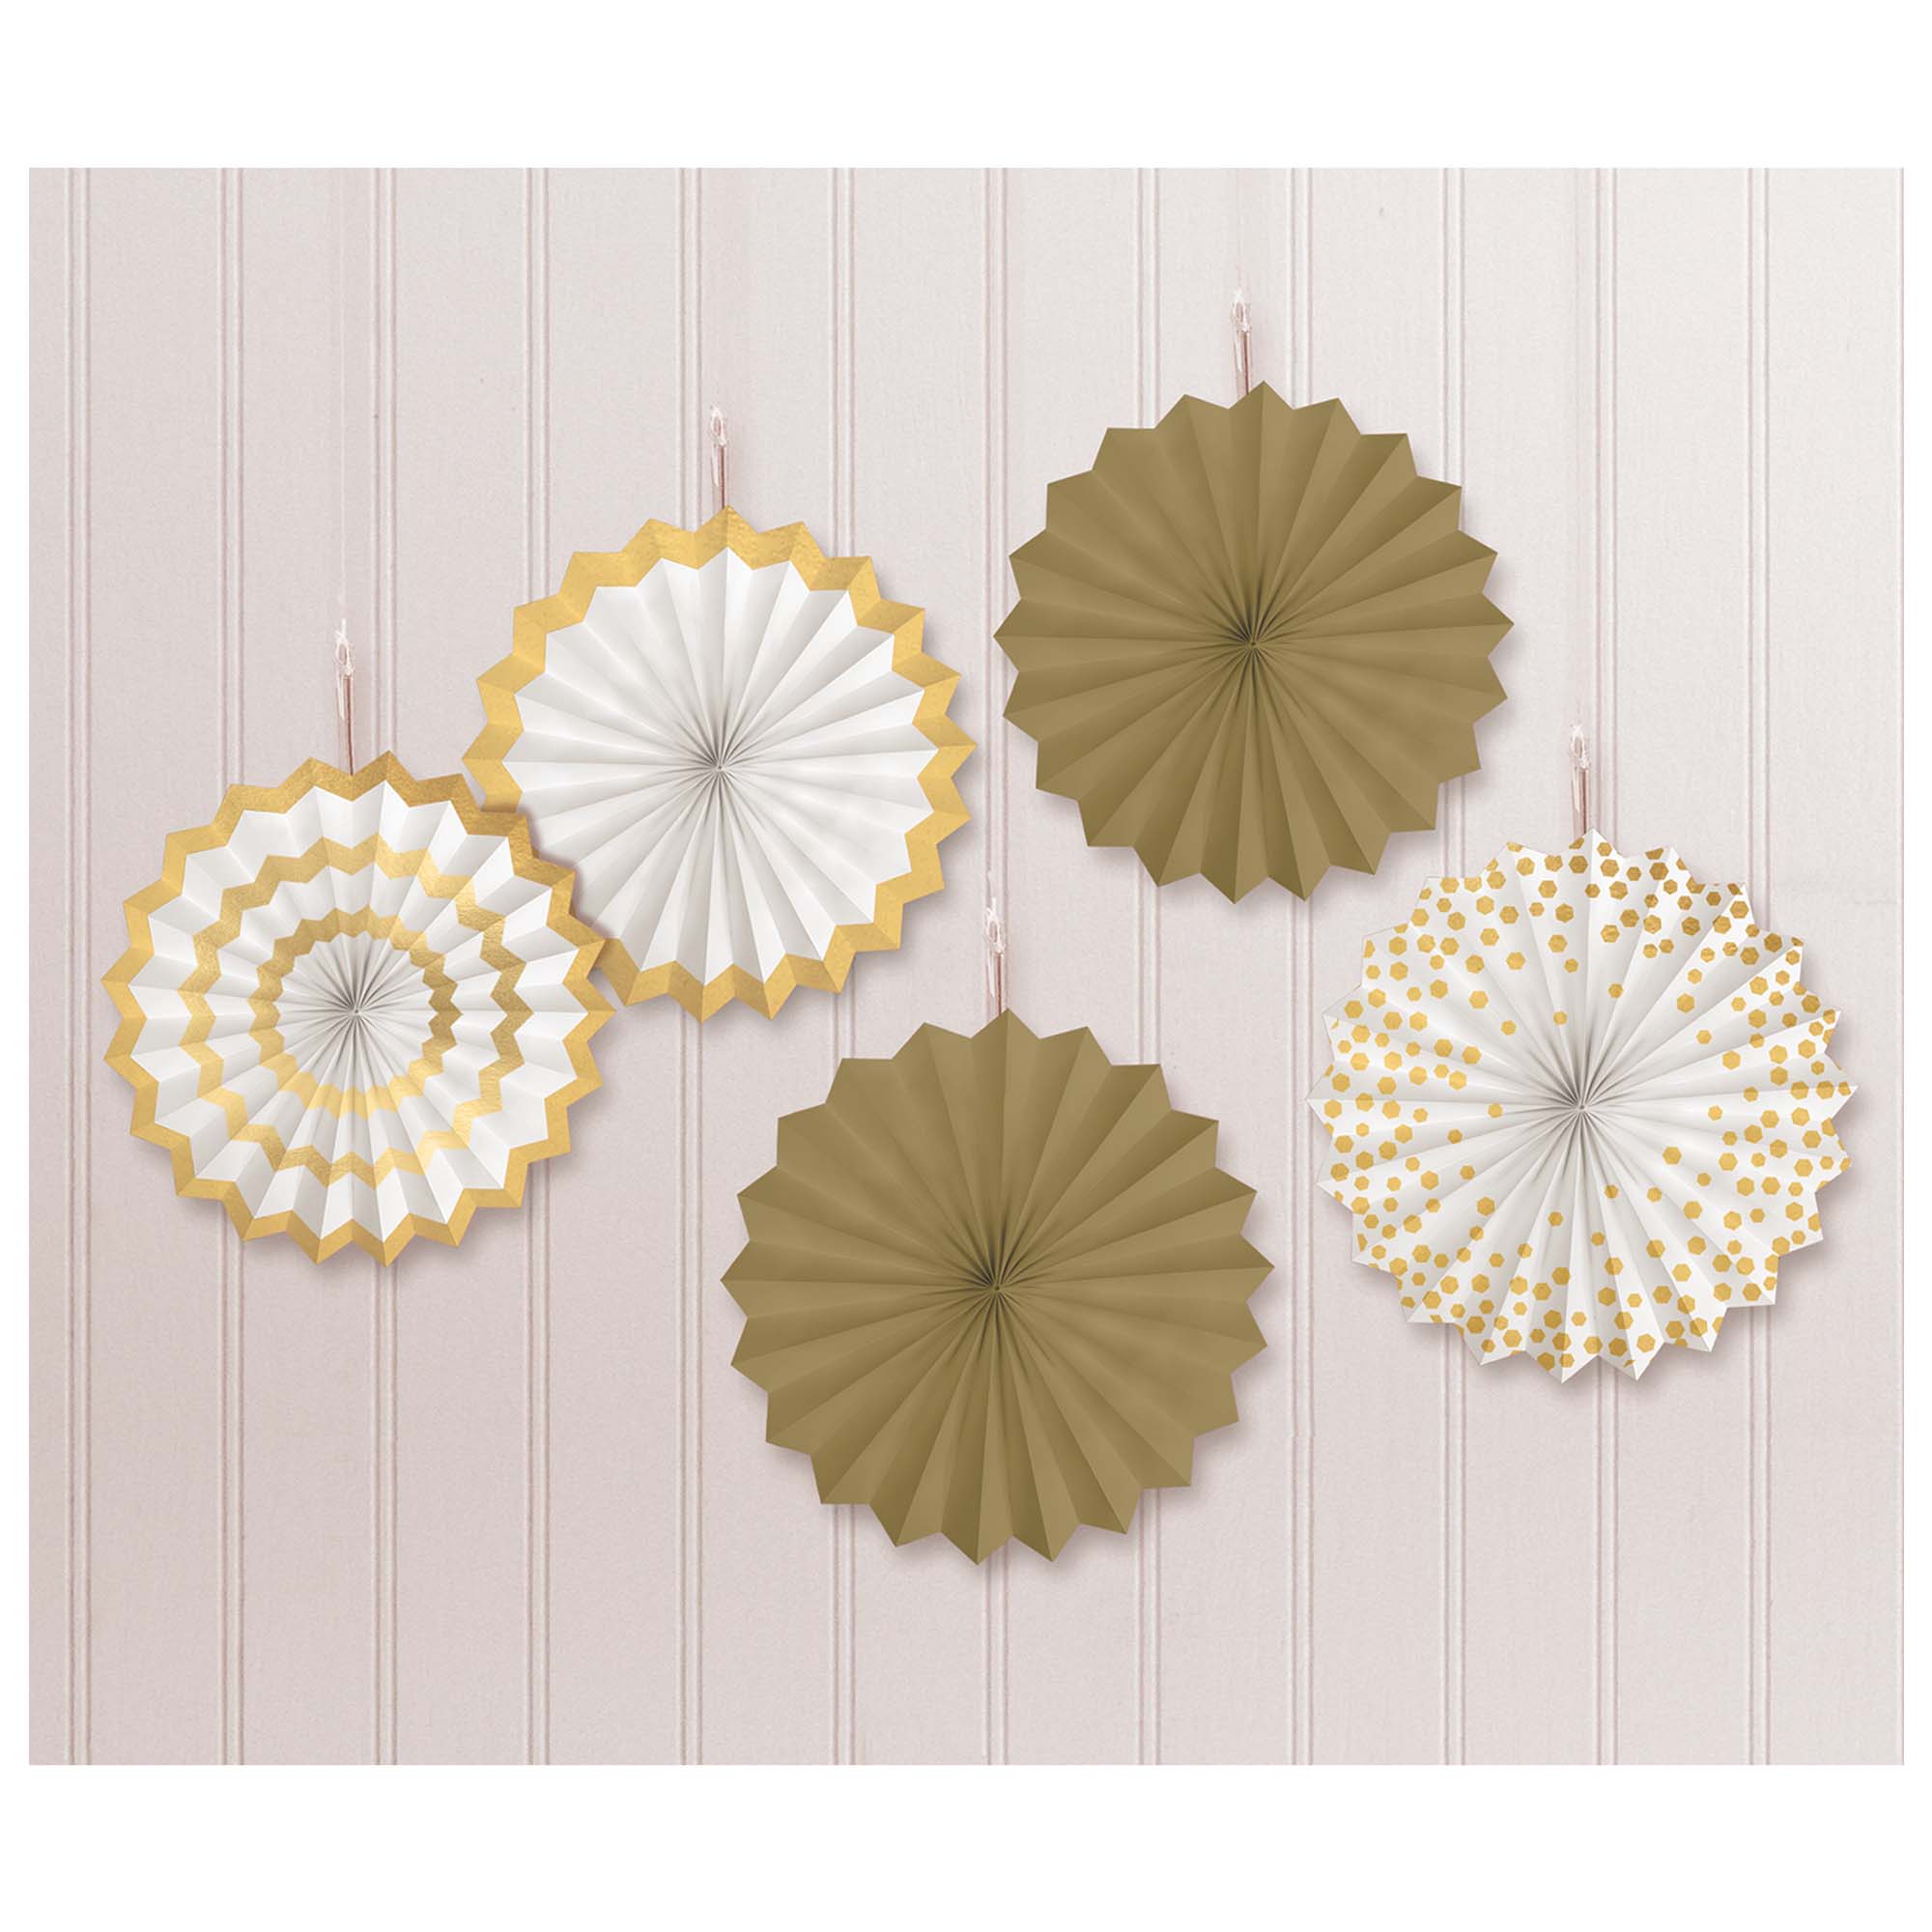 Gold 5 pack of 5" Paper Fans